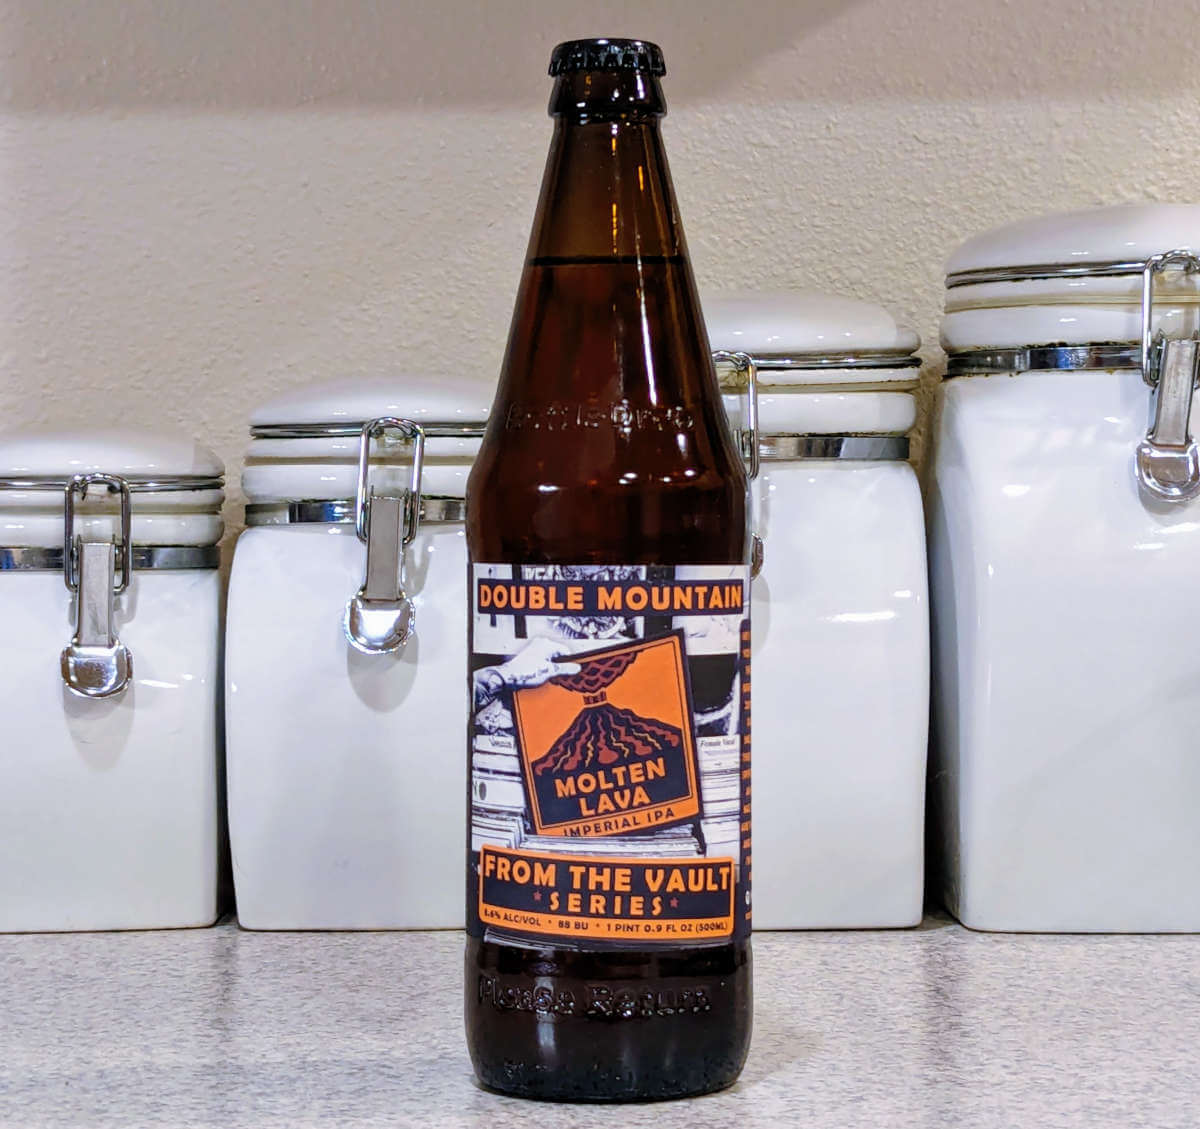 Received: Molten Lava Imperial IPA (from the vault) from Double Mountain Brewery